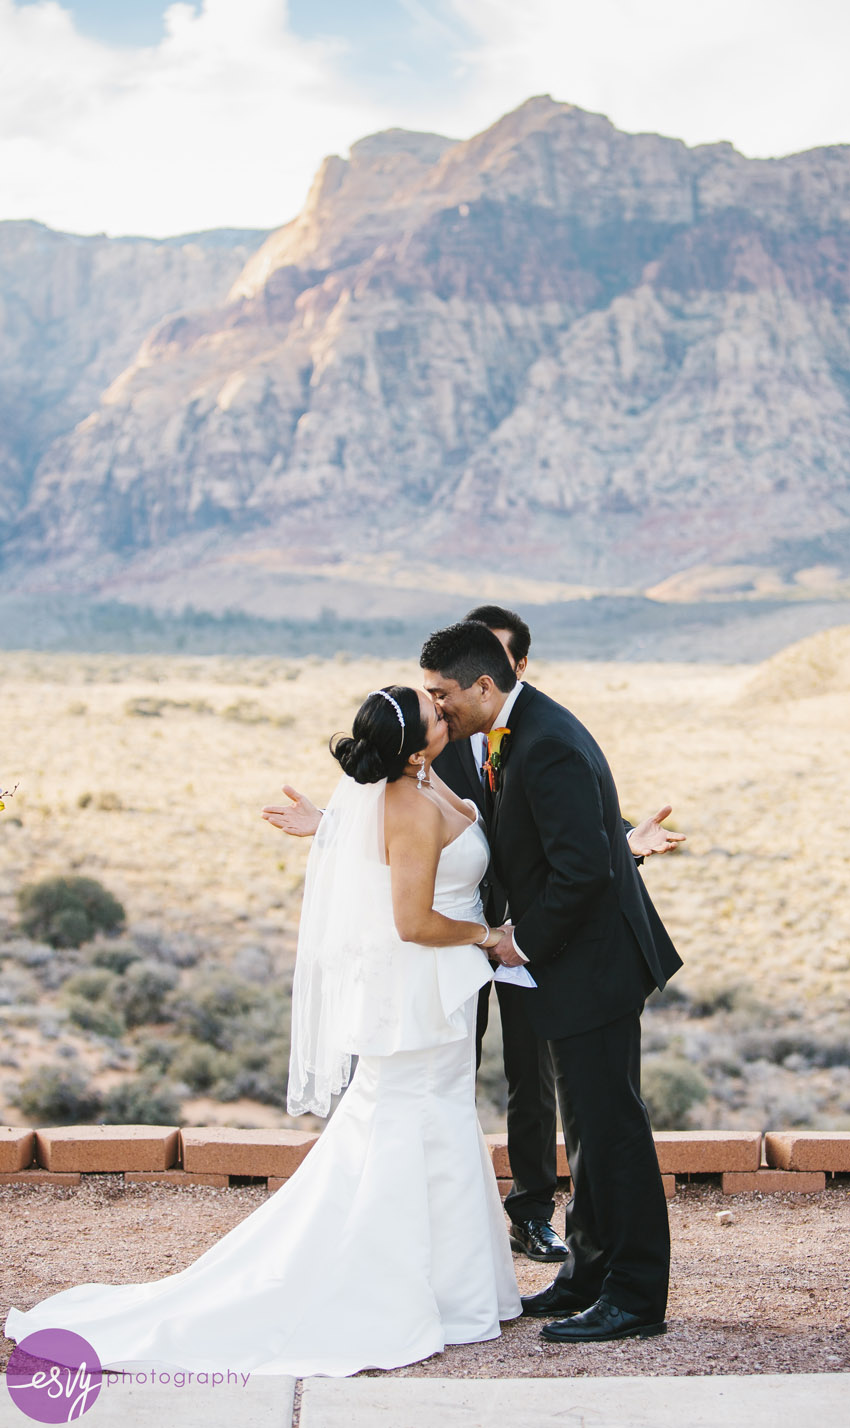 Esvy Photography – Red Rock Canyon Wedding – 30